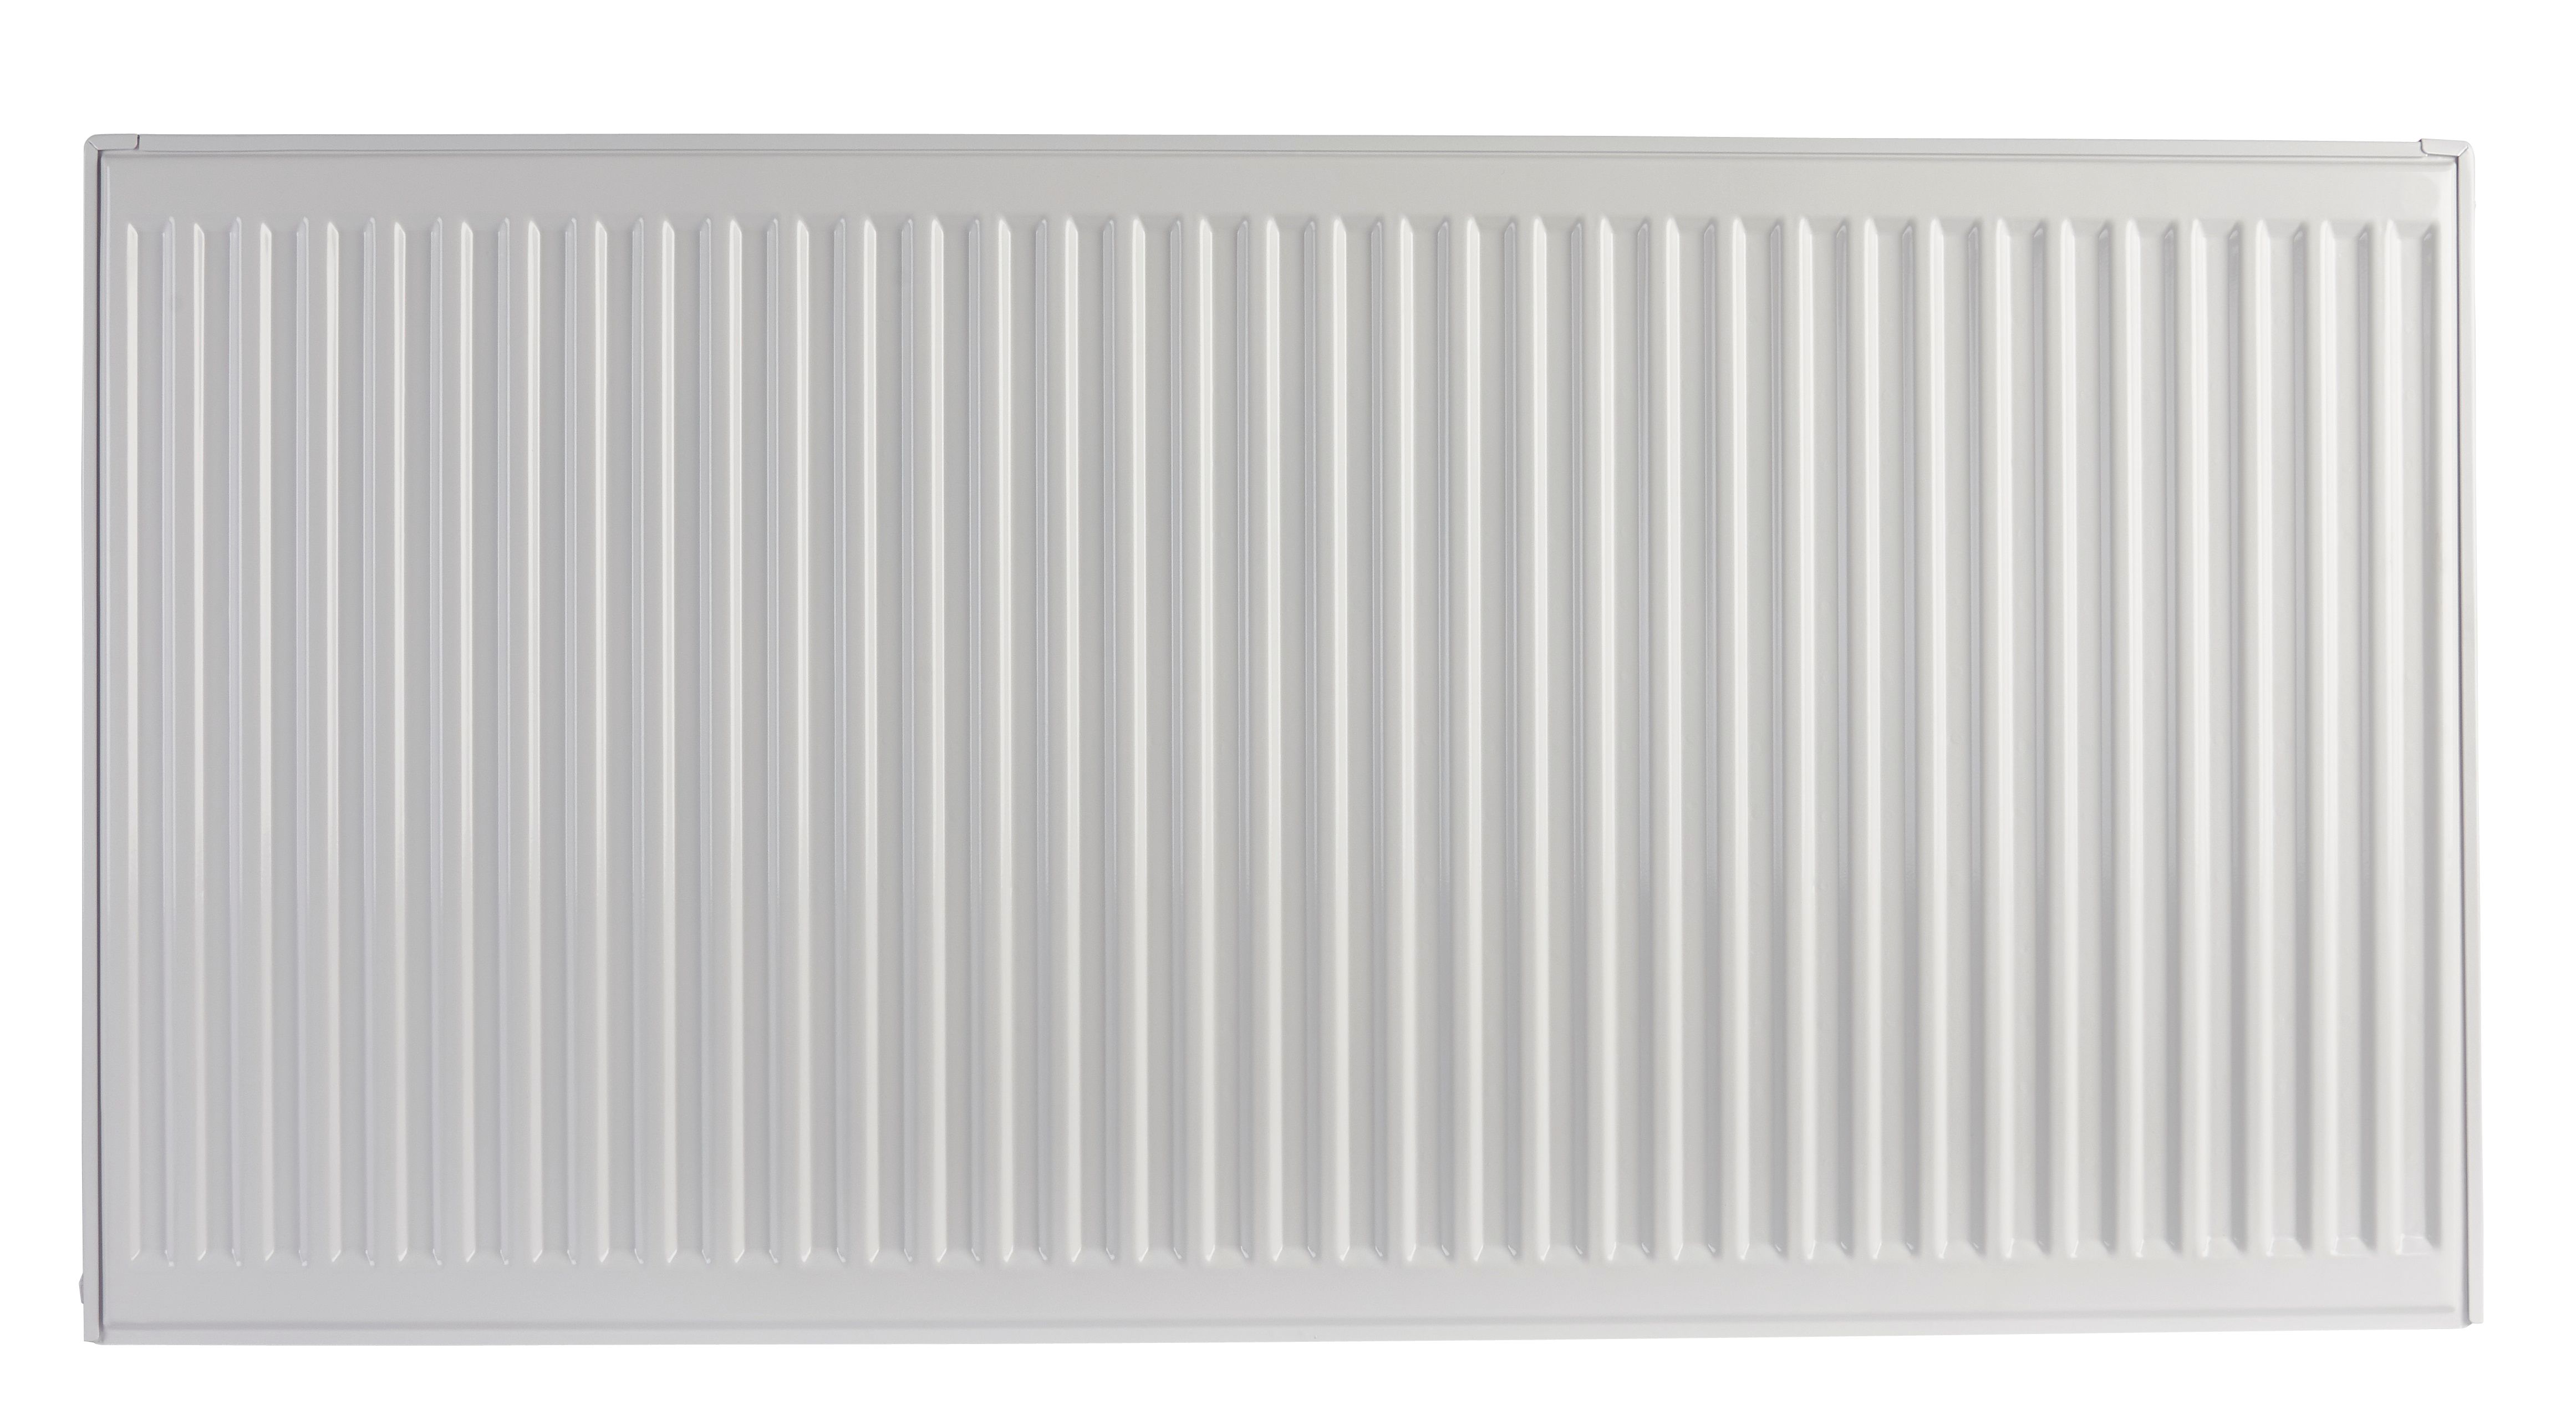 Homeline by Stelrad 500 x 600mm Type 21 Double Panel Plus Single Convector Radiator